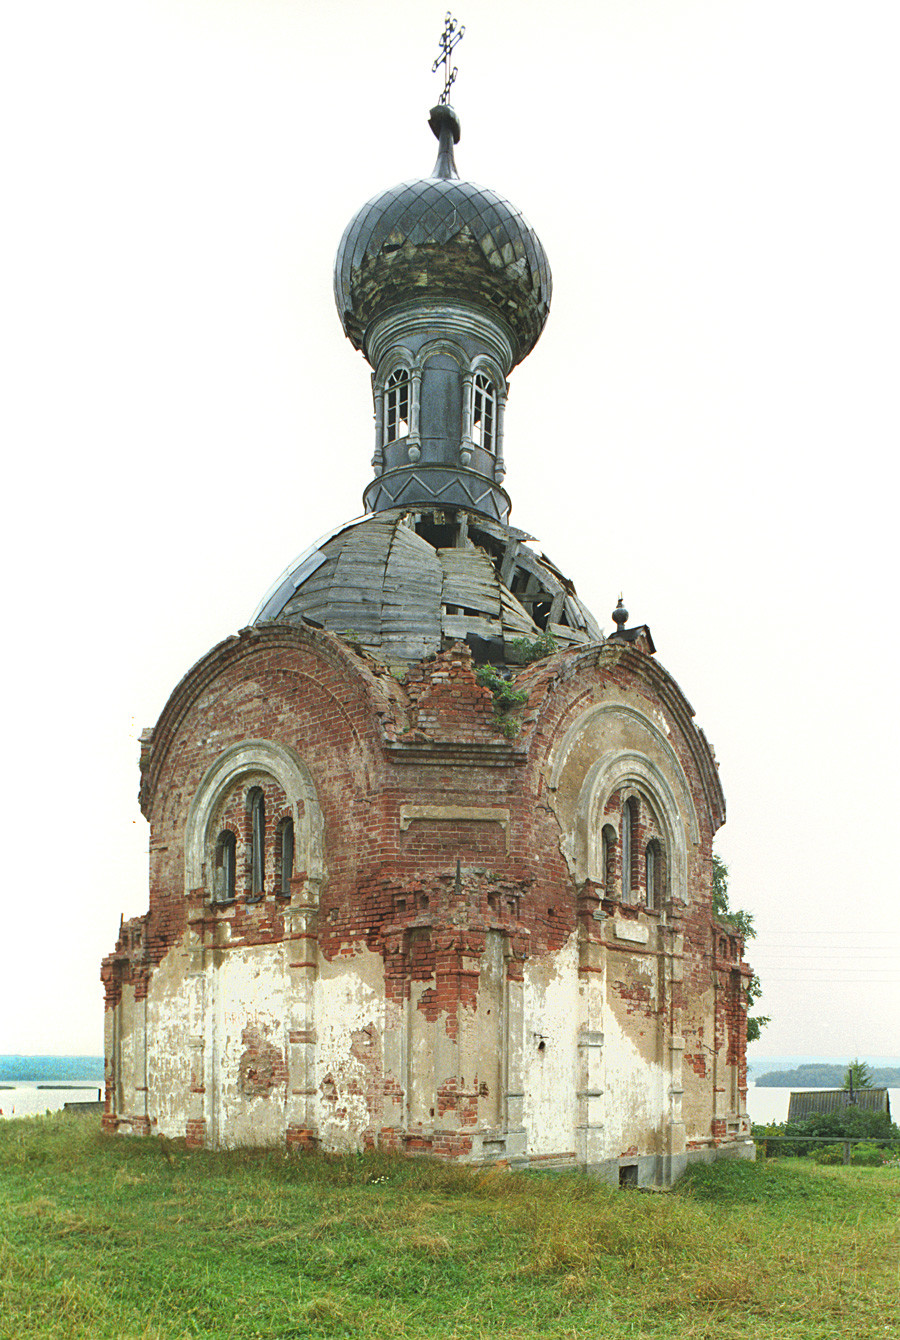 Ankhimovo. Church of All Saints, northeast view. August 28, 2006.